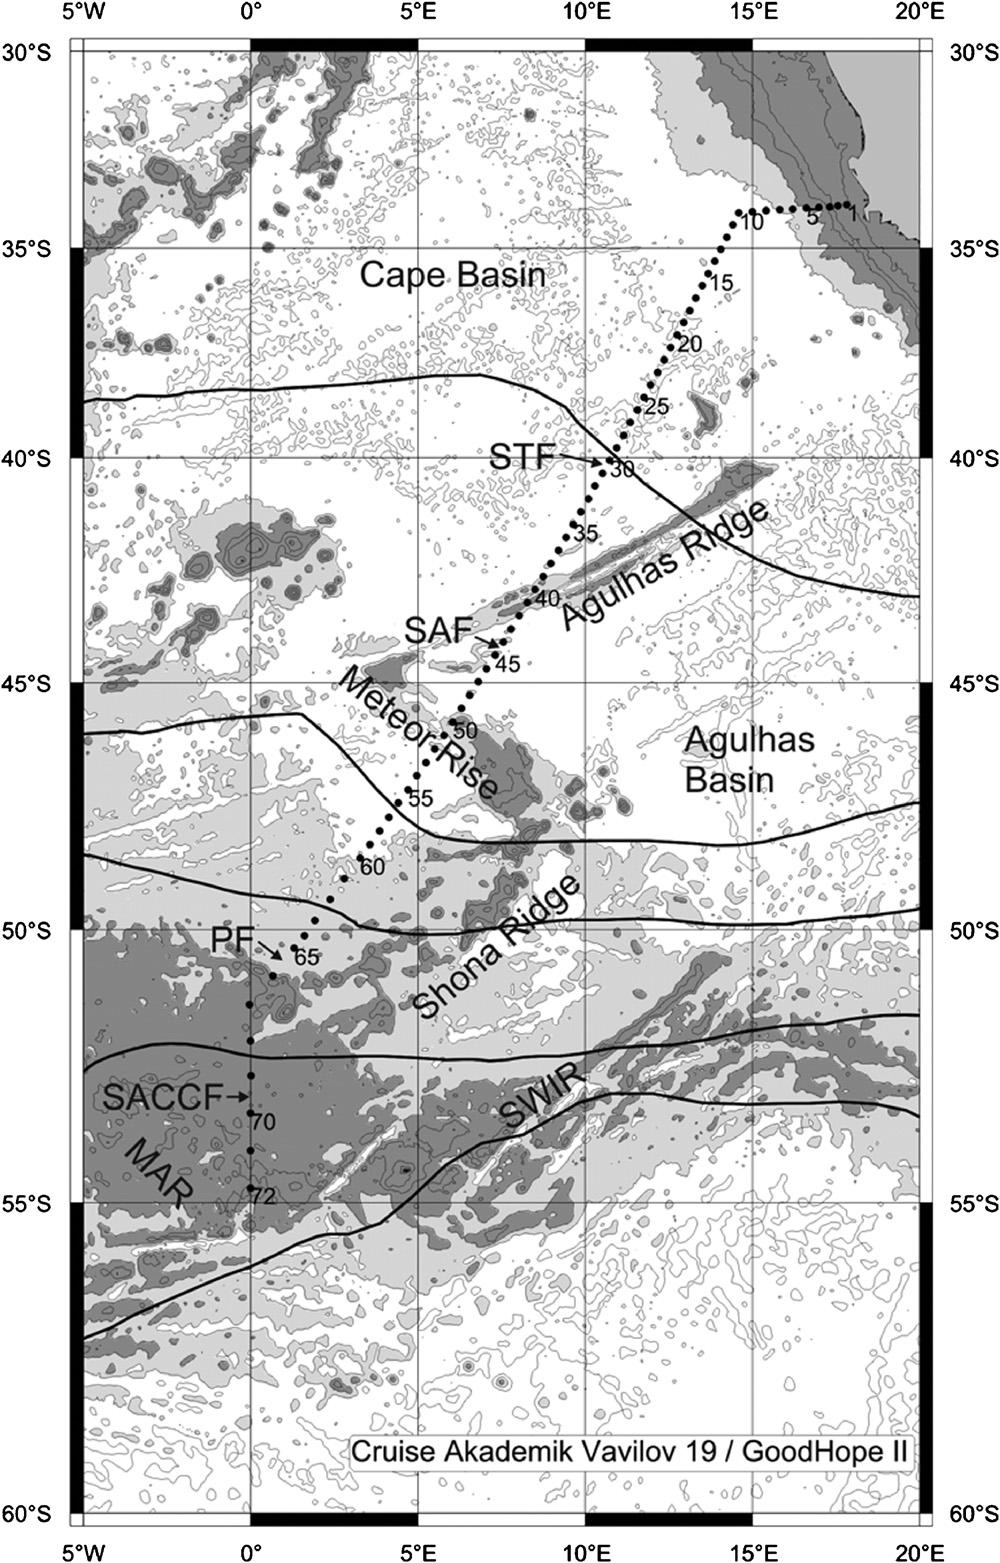 1286 S. Gladyshev et al. / Deep-Sea Research I 55 (28) 1284 133 Fig. 1. Map showing the ASV-19 cruise track, station numbers, bathymetry (isobaths 2 m and multiples of 1 m), and the ACC fronts.